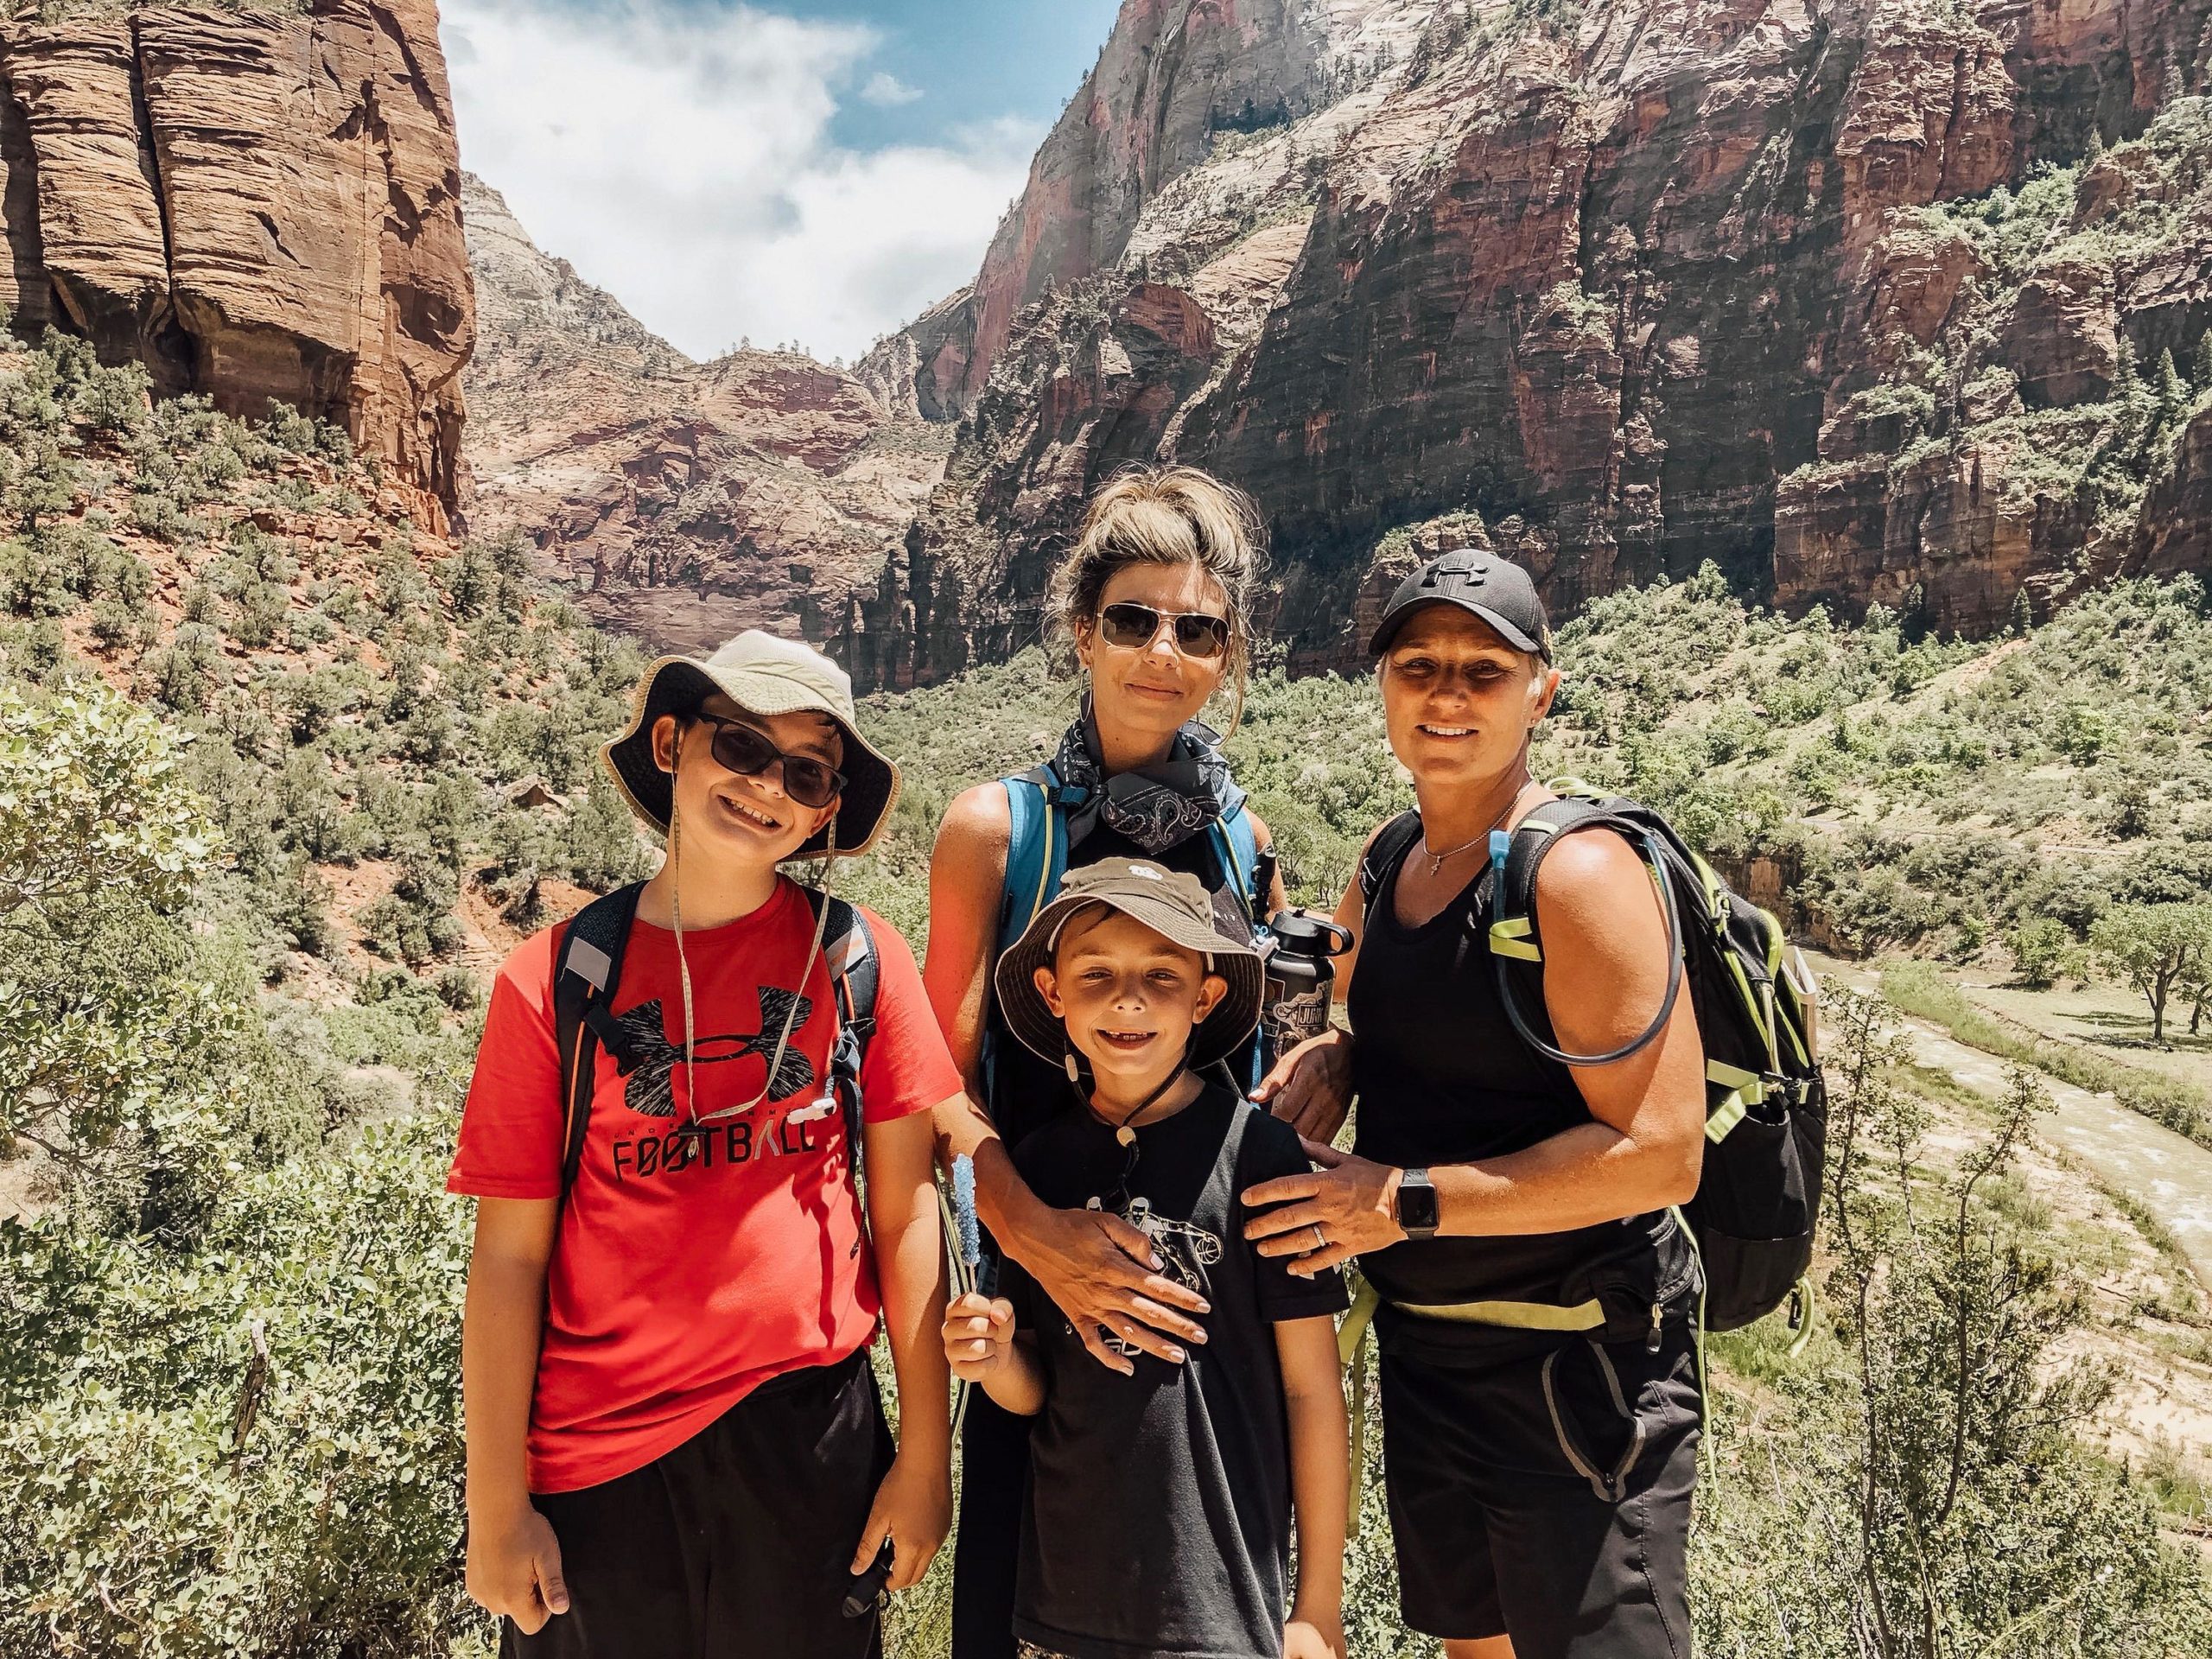 Trish and wife Janice Gallagher with family on a hike